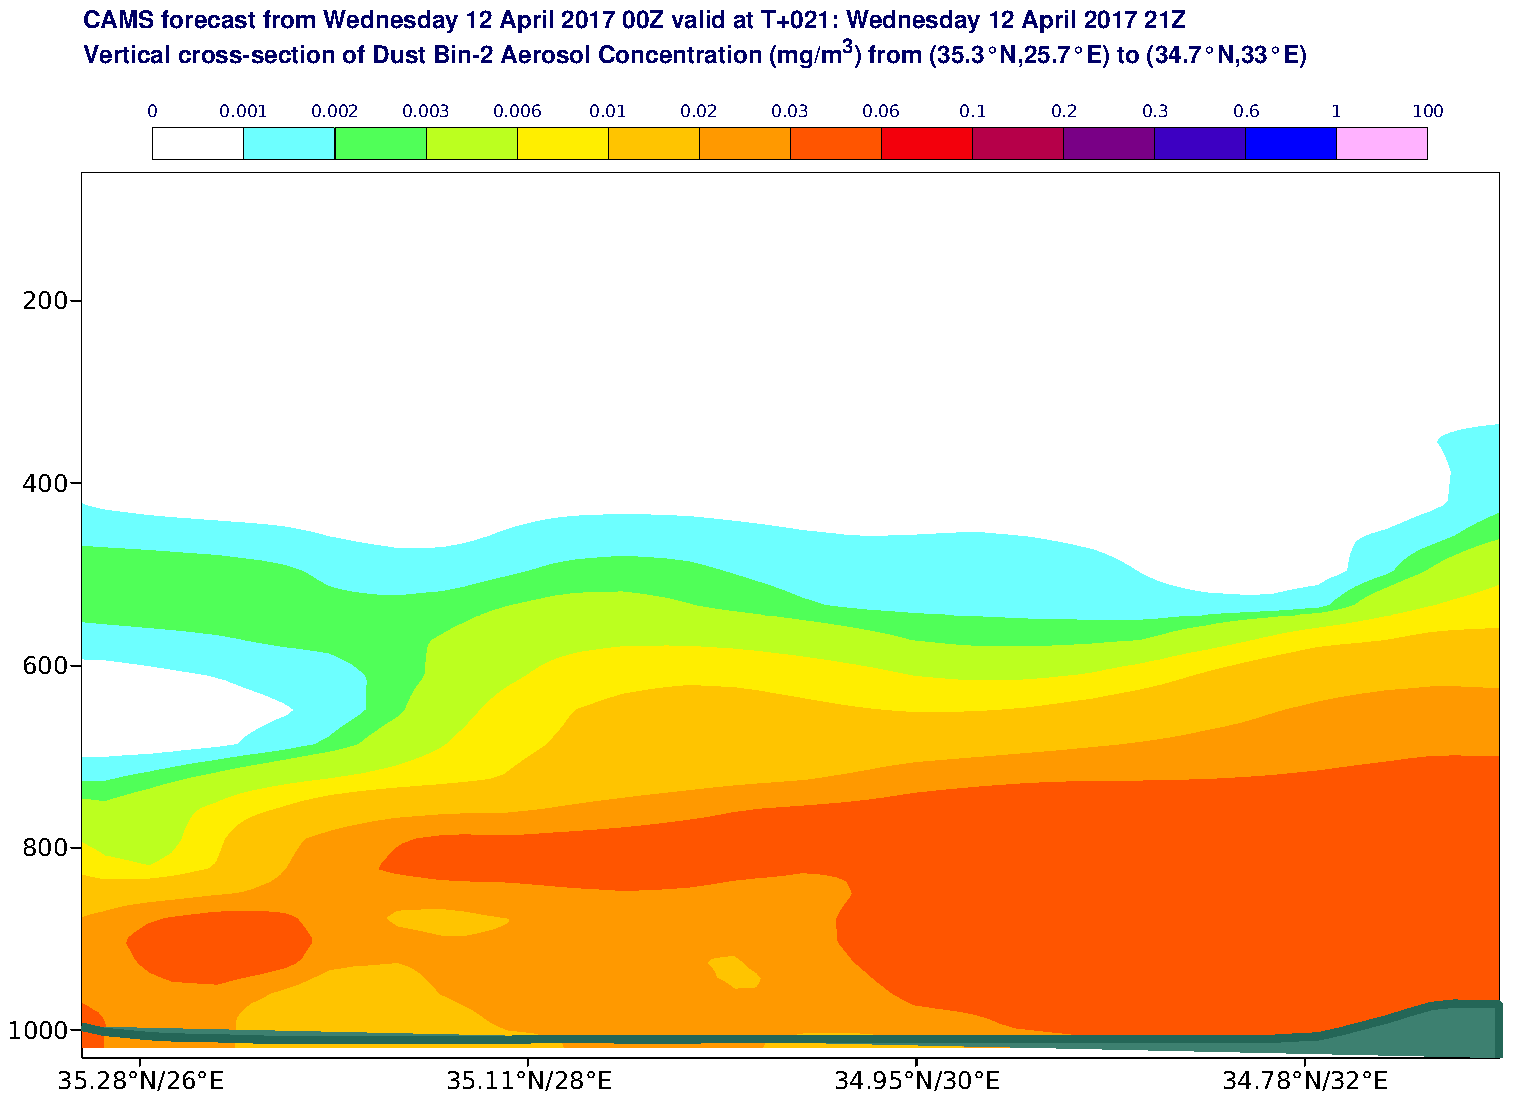 Vertical cross-section of Dust Bin-2 Aerosol Concentration (mg/m3) valid at T21 - 2017-04-12 21:00